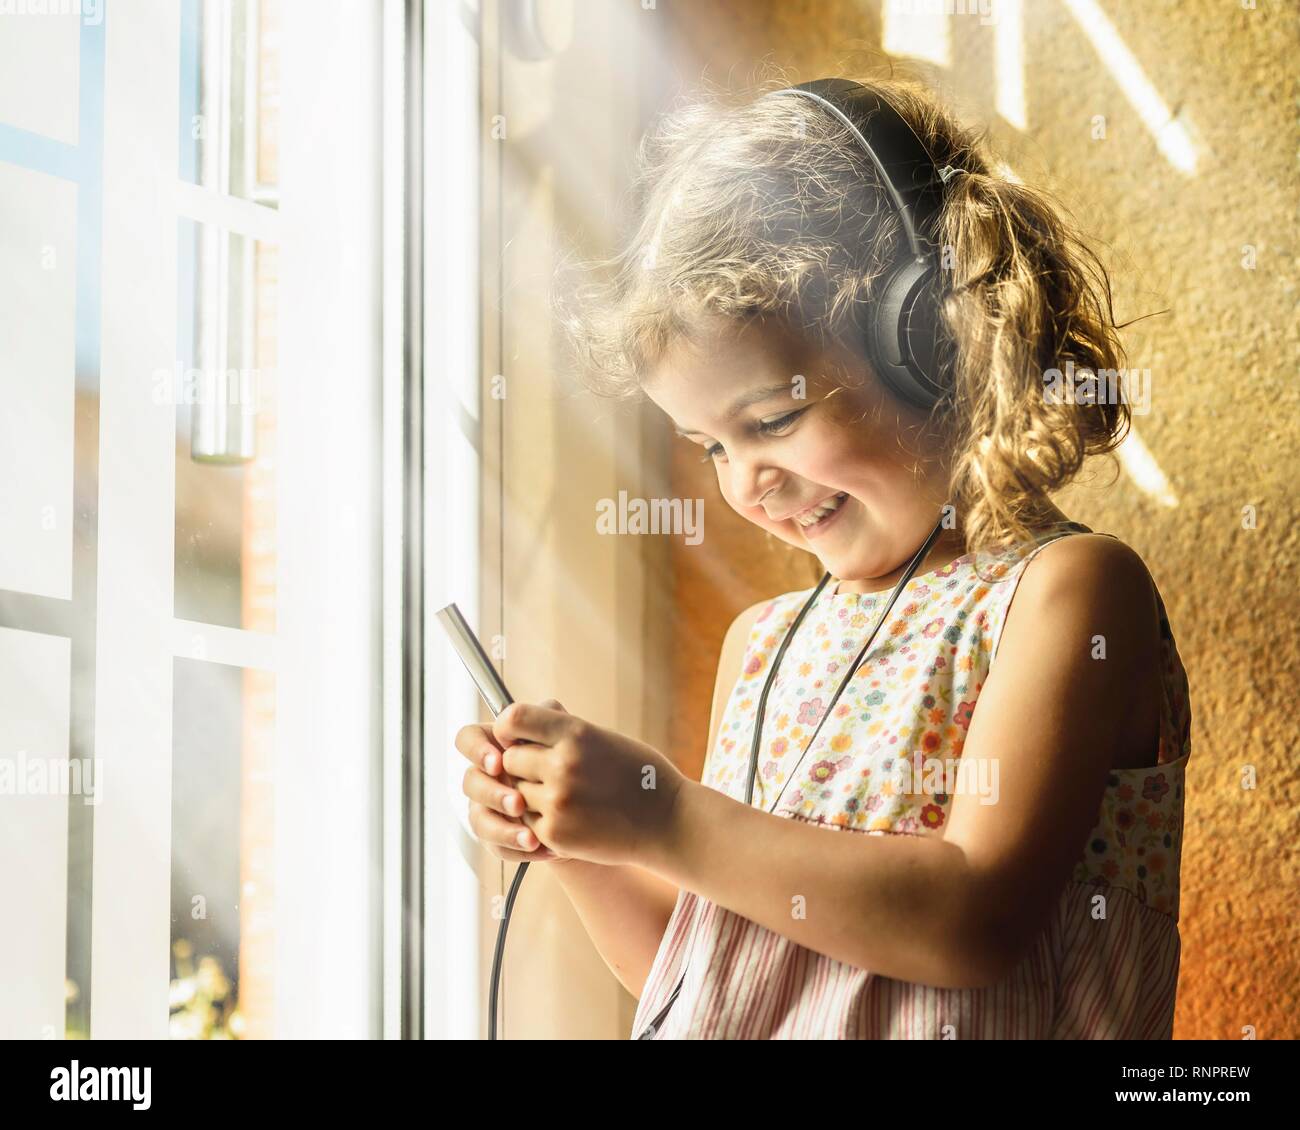 Girl, 3 years, listens to music with headphones, good mood, Germany Stock Photo